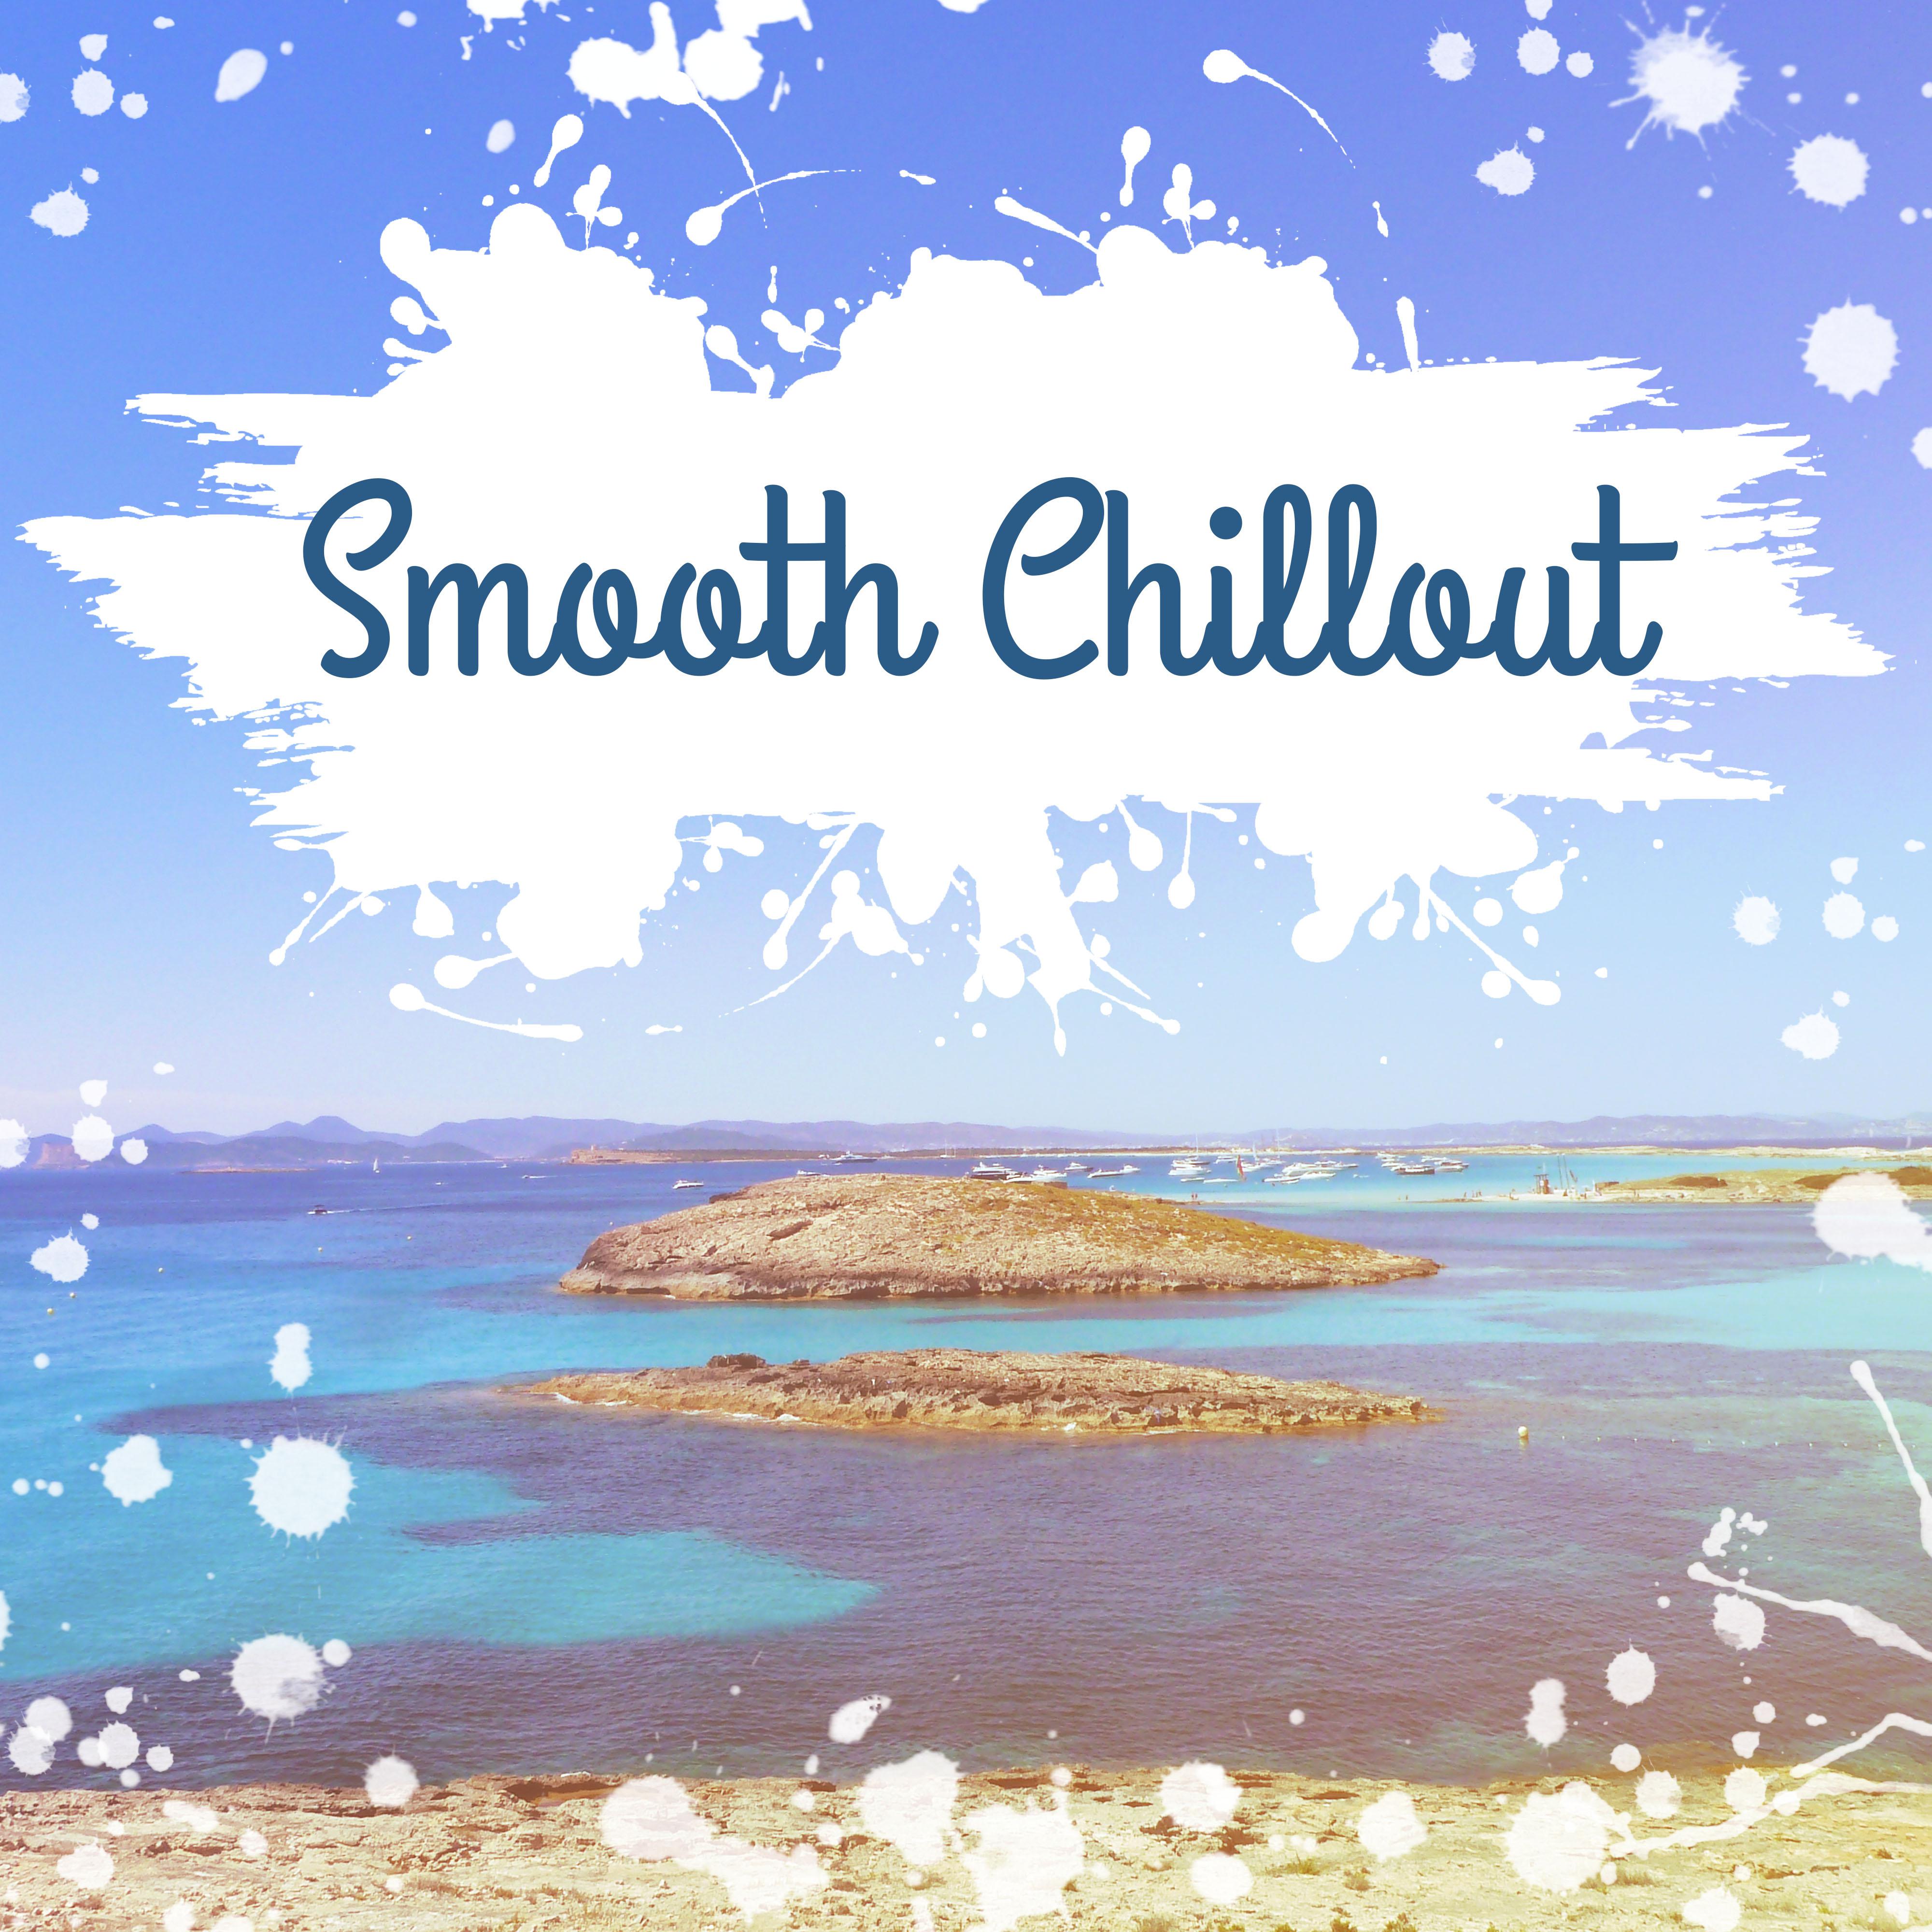 Chillout Cafe